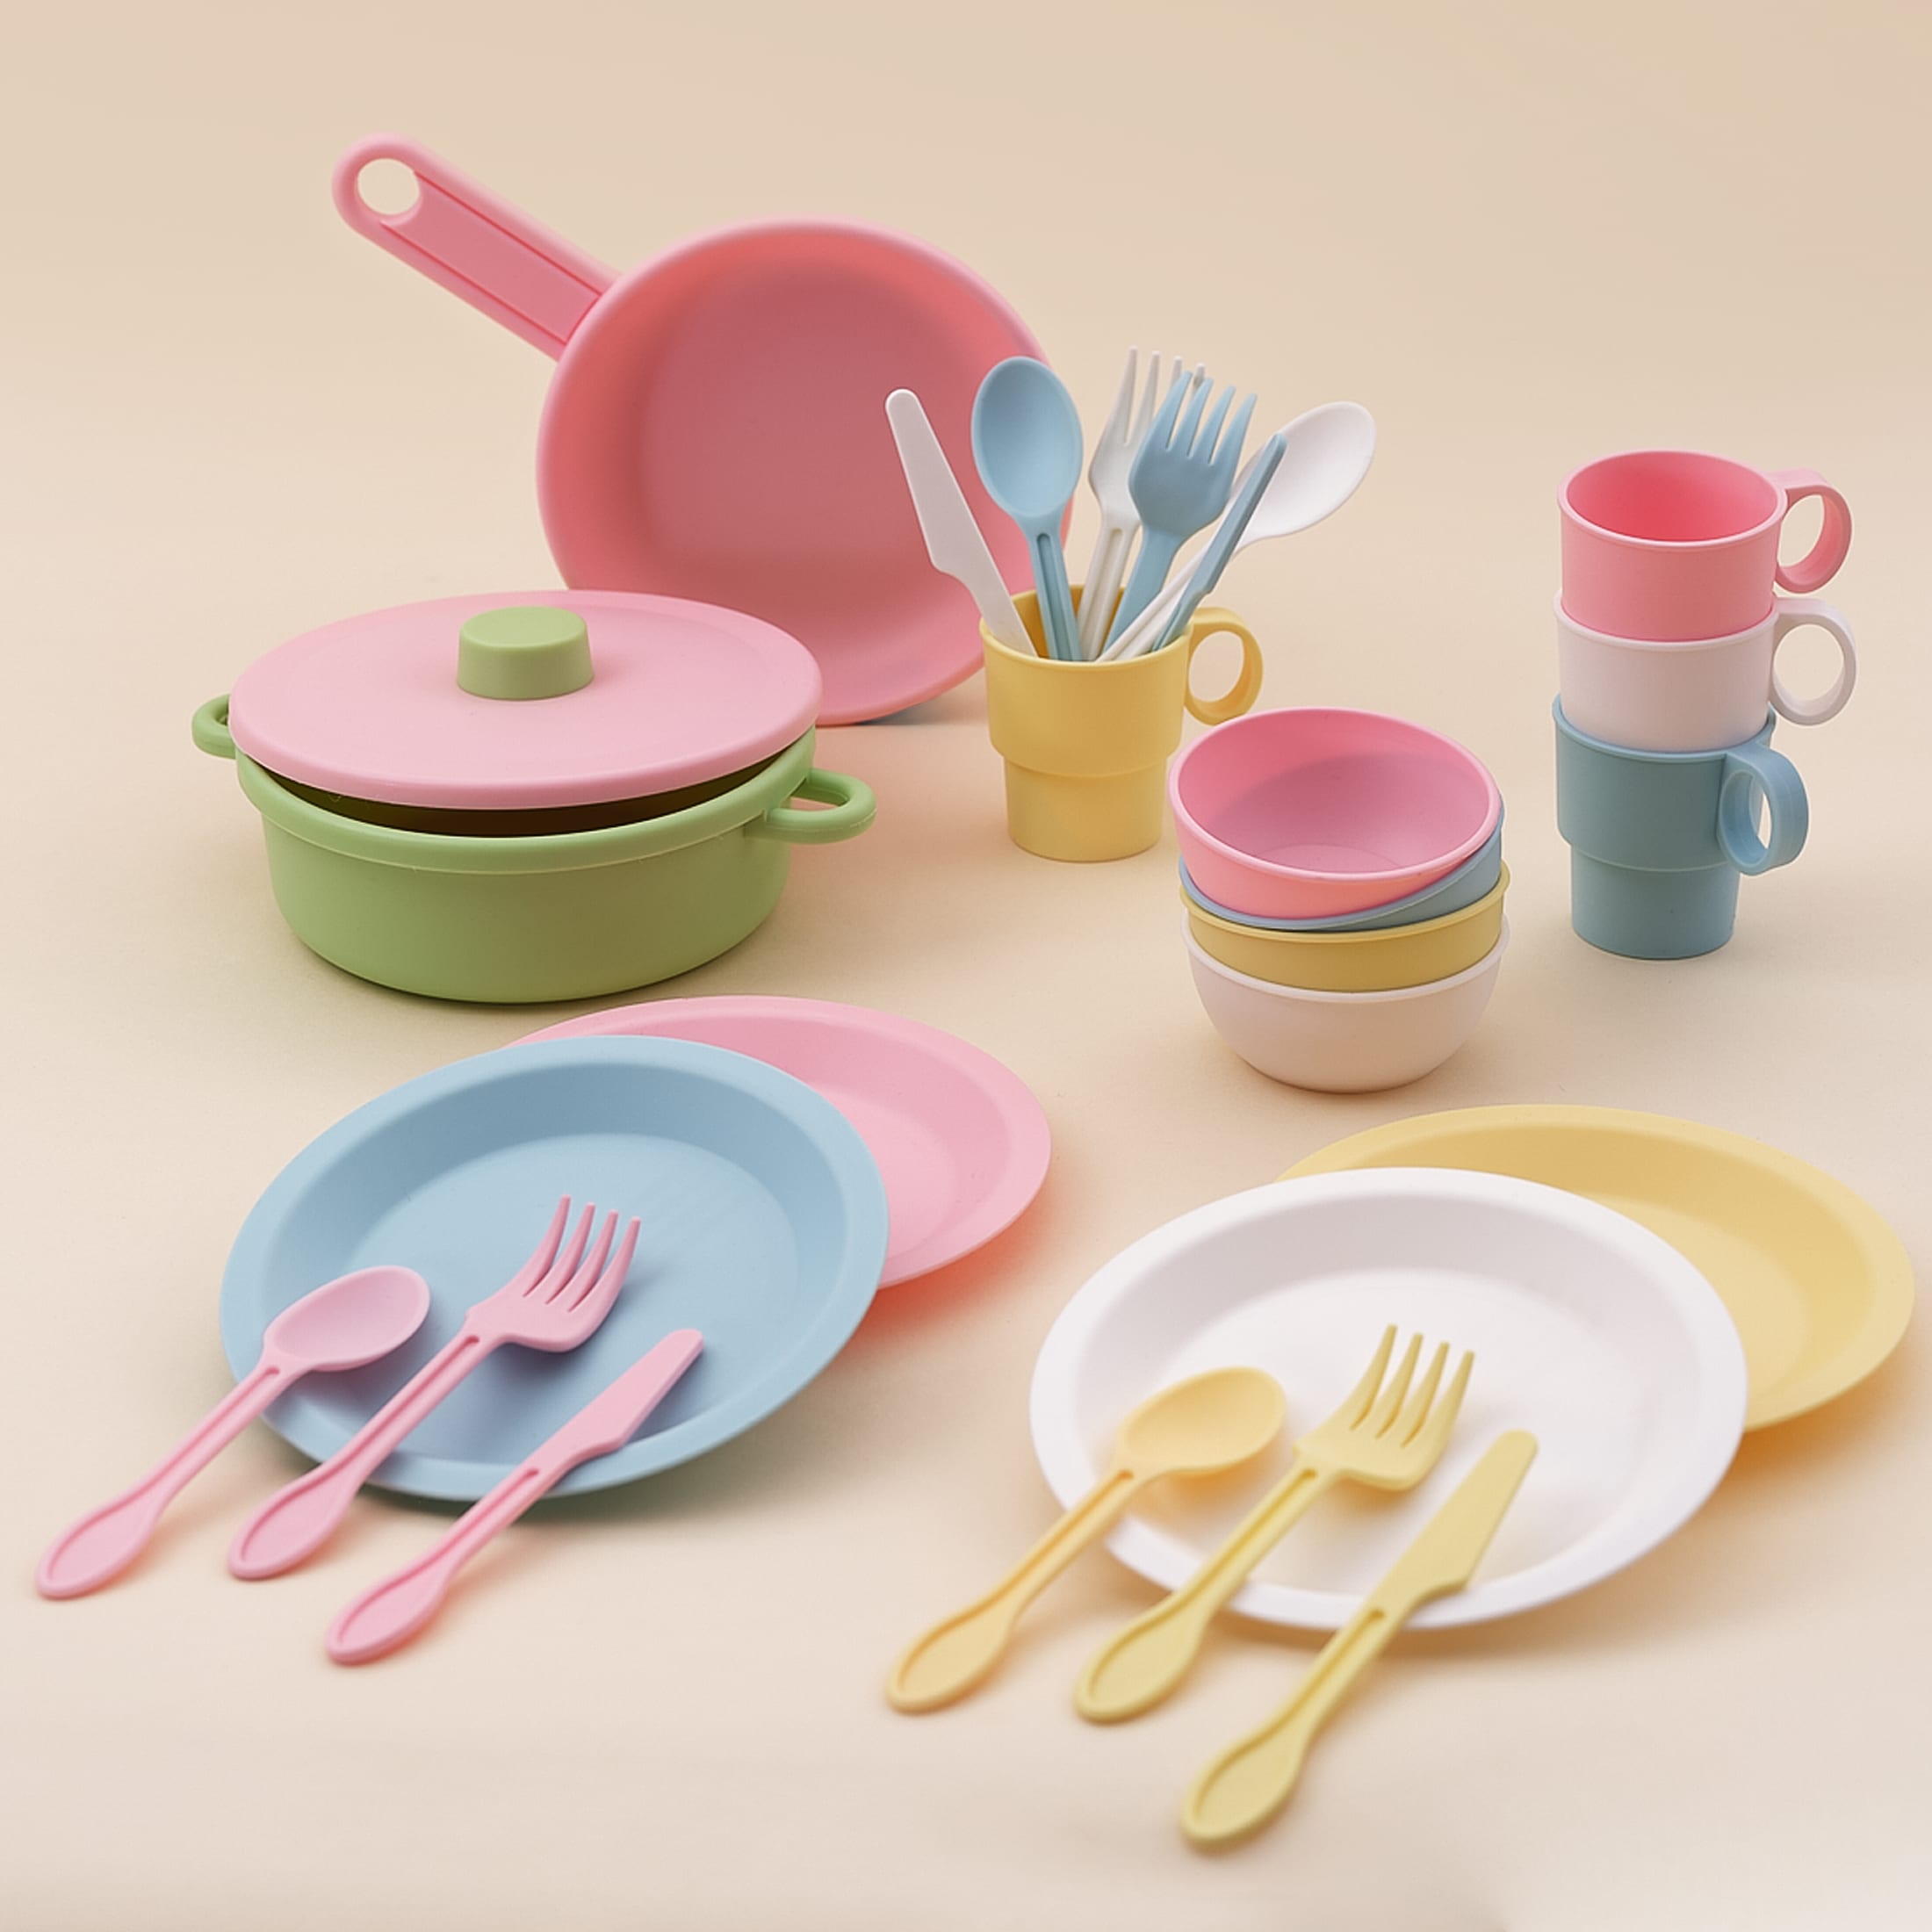 KidKraft 27-Piece Pastel Cookware Set, Plastic Dishes and Utensils for Play Kitchens - image 2 of 5